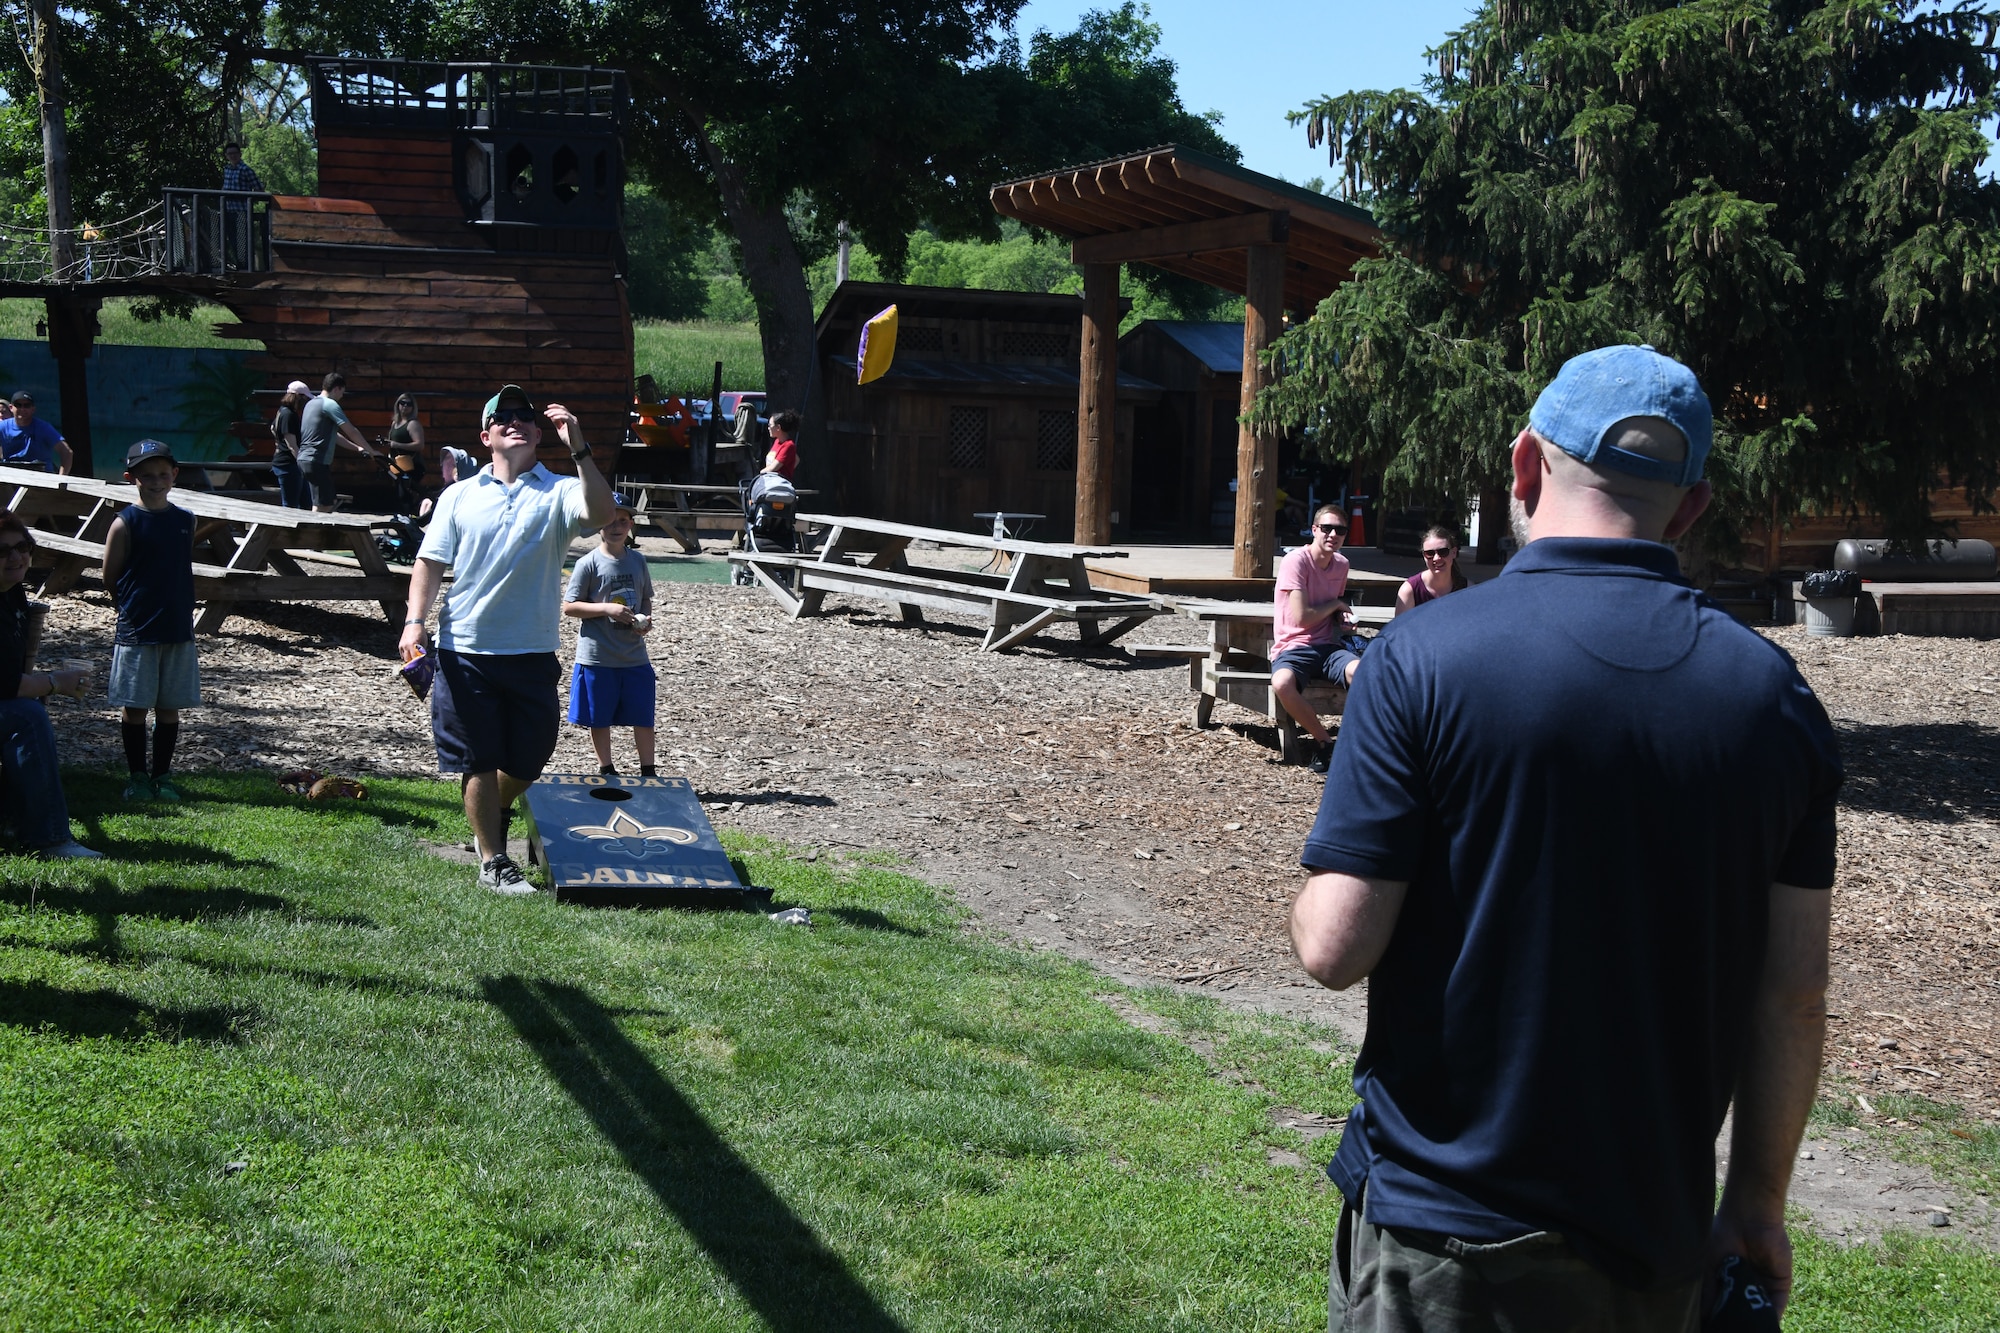 Master Sgt. Bryan Johnson, 1st Weather Group, pitches a bag against Chief Master Sgt. Kevin Paul, 557th Weather Wing command chief, during a game of Cornhole at the 2021 557th Weather Wing Picnic at the Bellevue Berry Farm on June 4, 2021 in Bellevue, Nebraska.